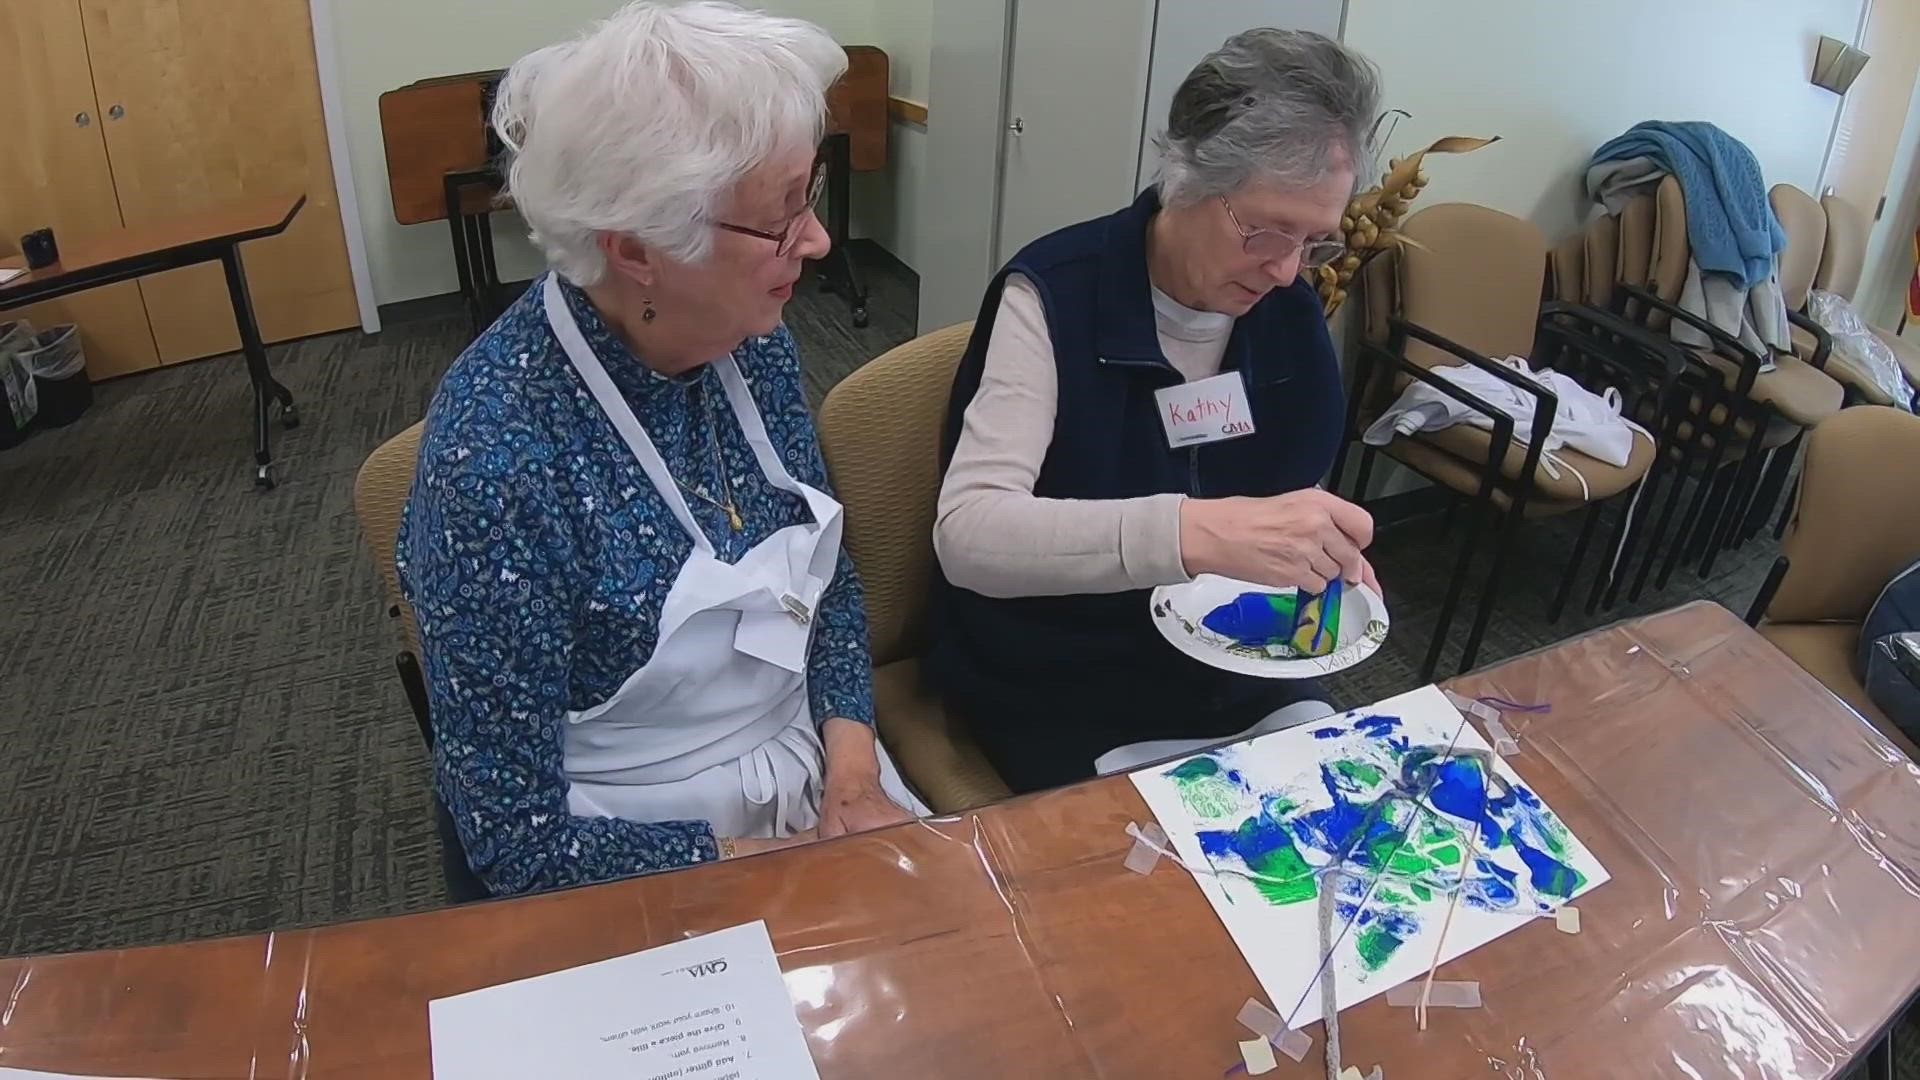 SeniorsPlus in Lewiston is using a federally-funded grant to bring the national "Opening Minds through Art" program to Lewiston, Norway, and Wilton.